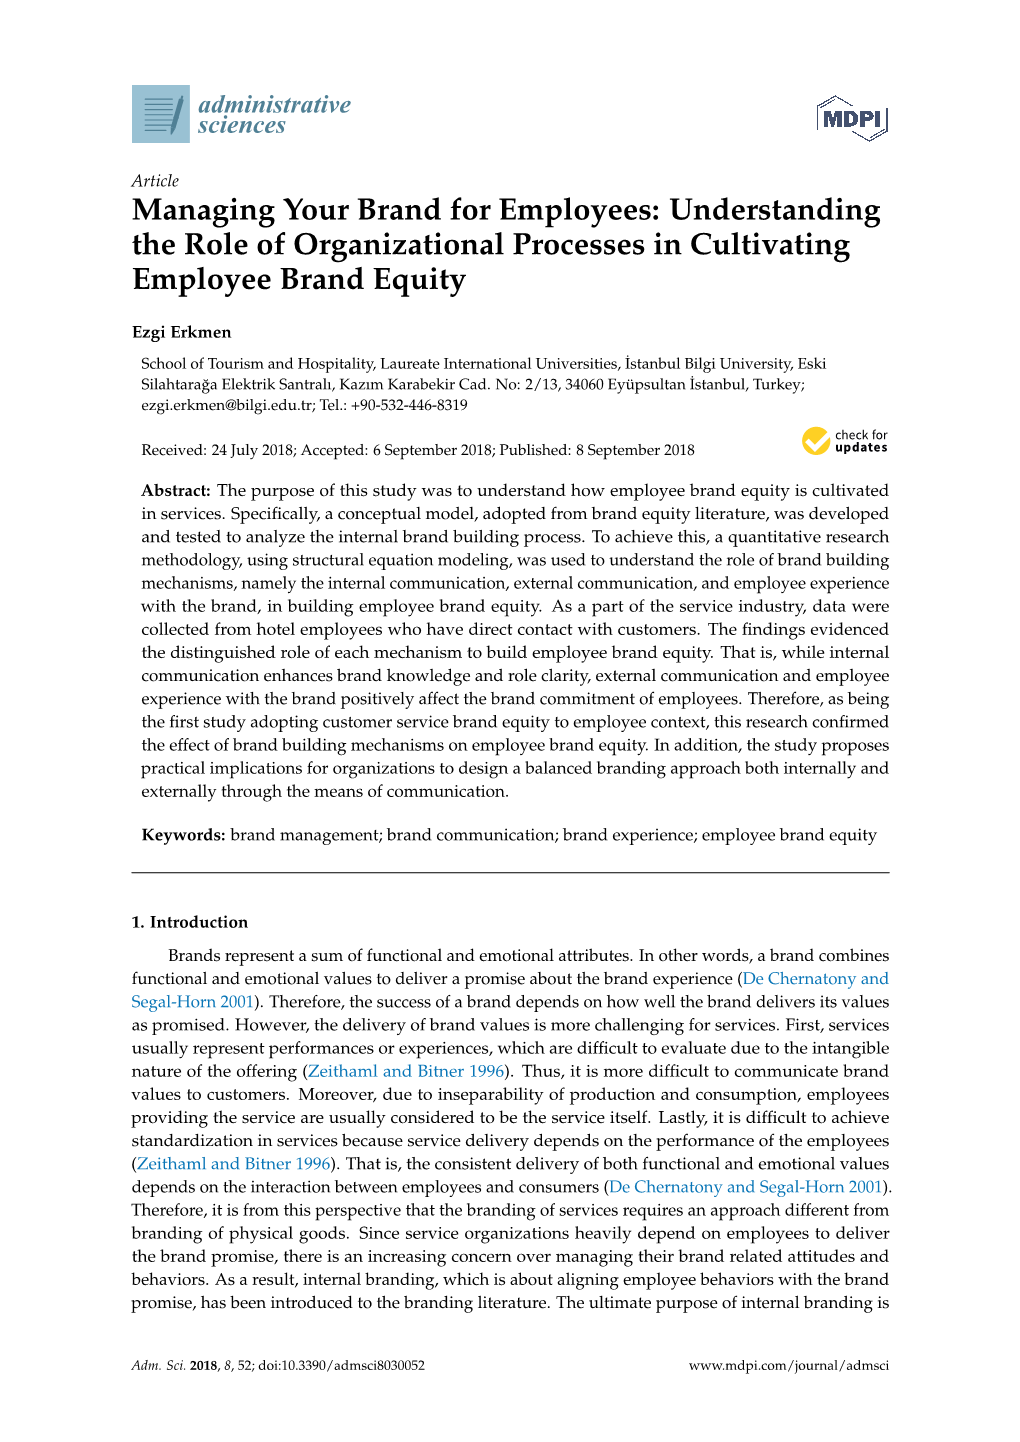 Understanding the Role of Organizational Processes in Cultivating Employee Brand Equity